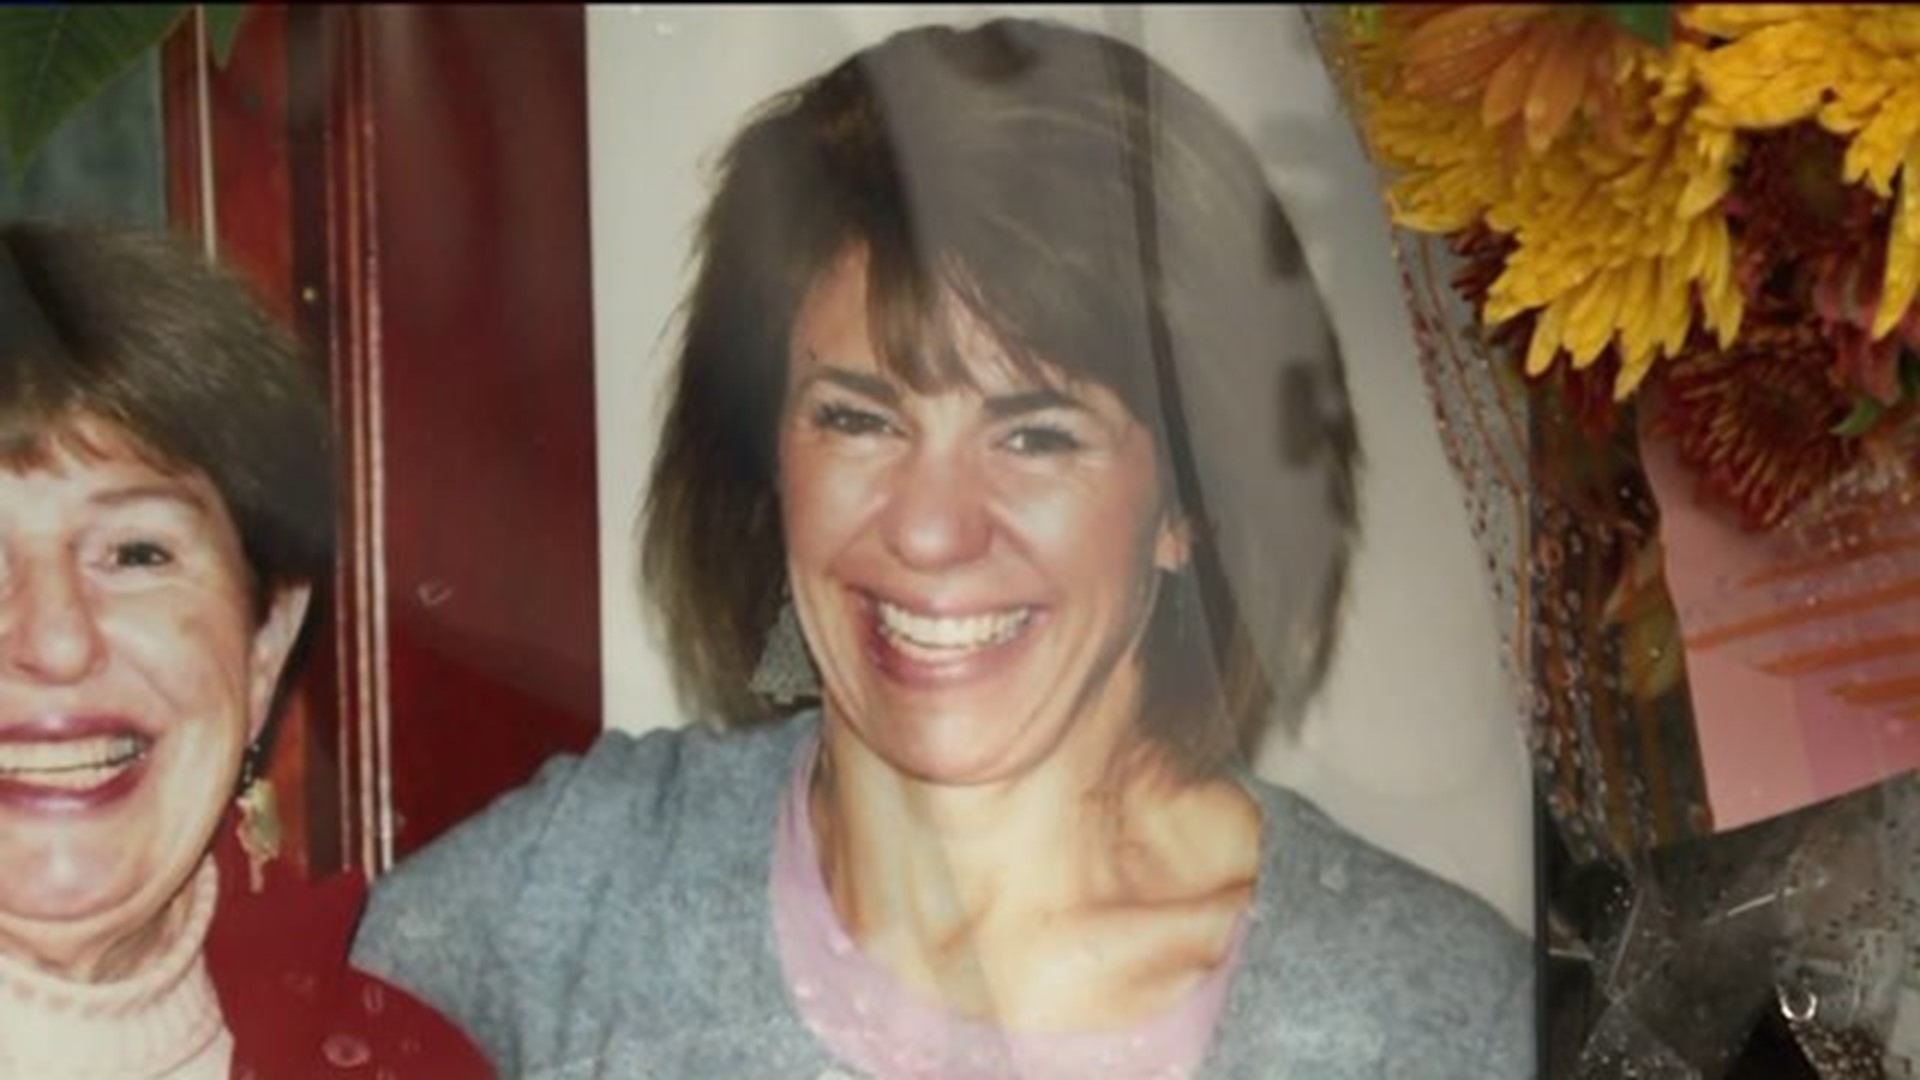 Crews search for new info in year-old murder case in Simsbury